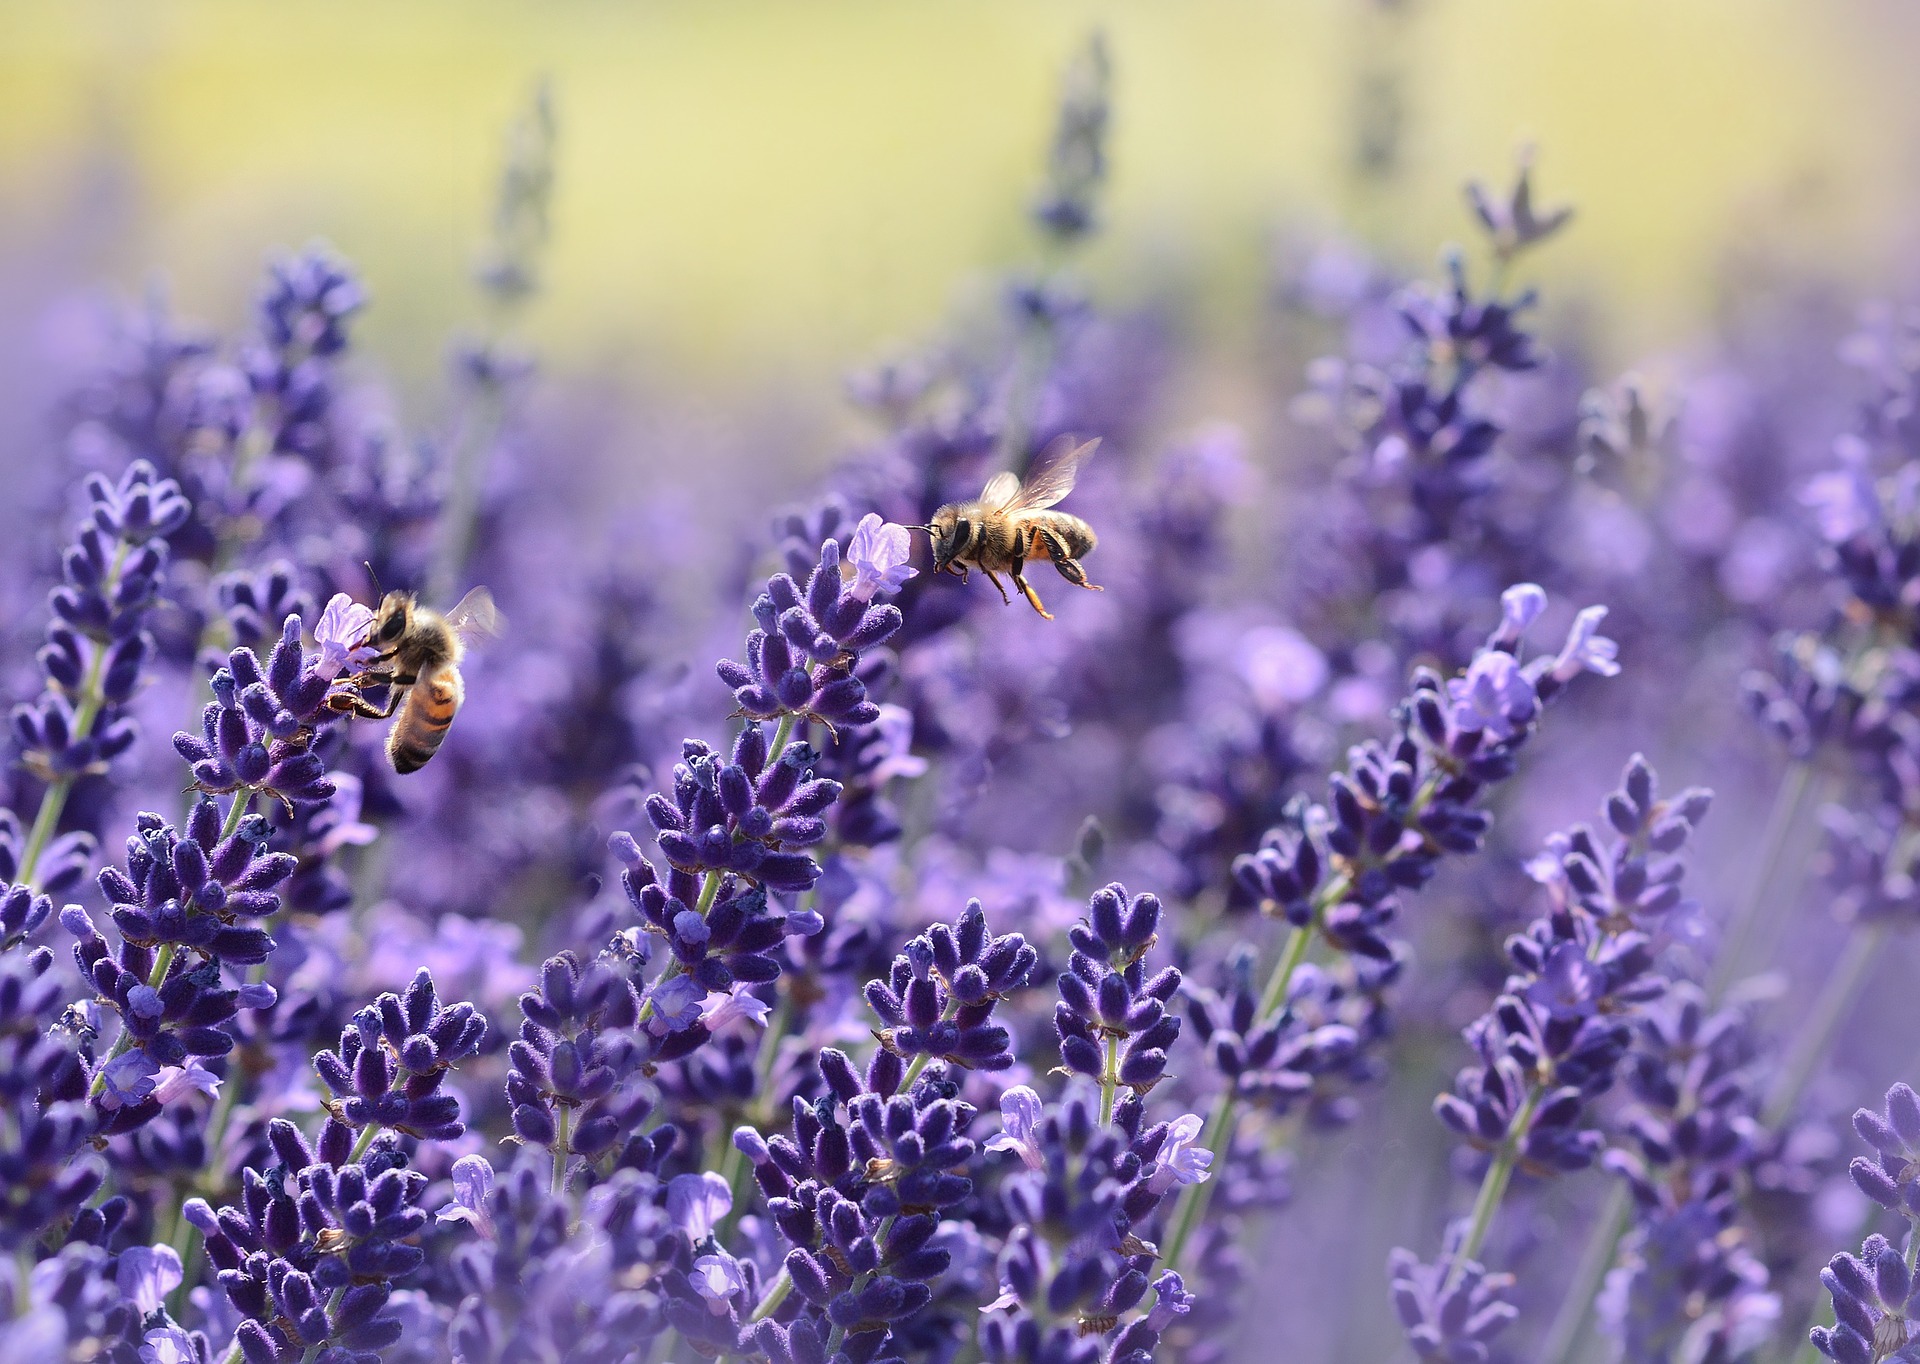 Food retailers fail to protect bees from toxic pesticides